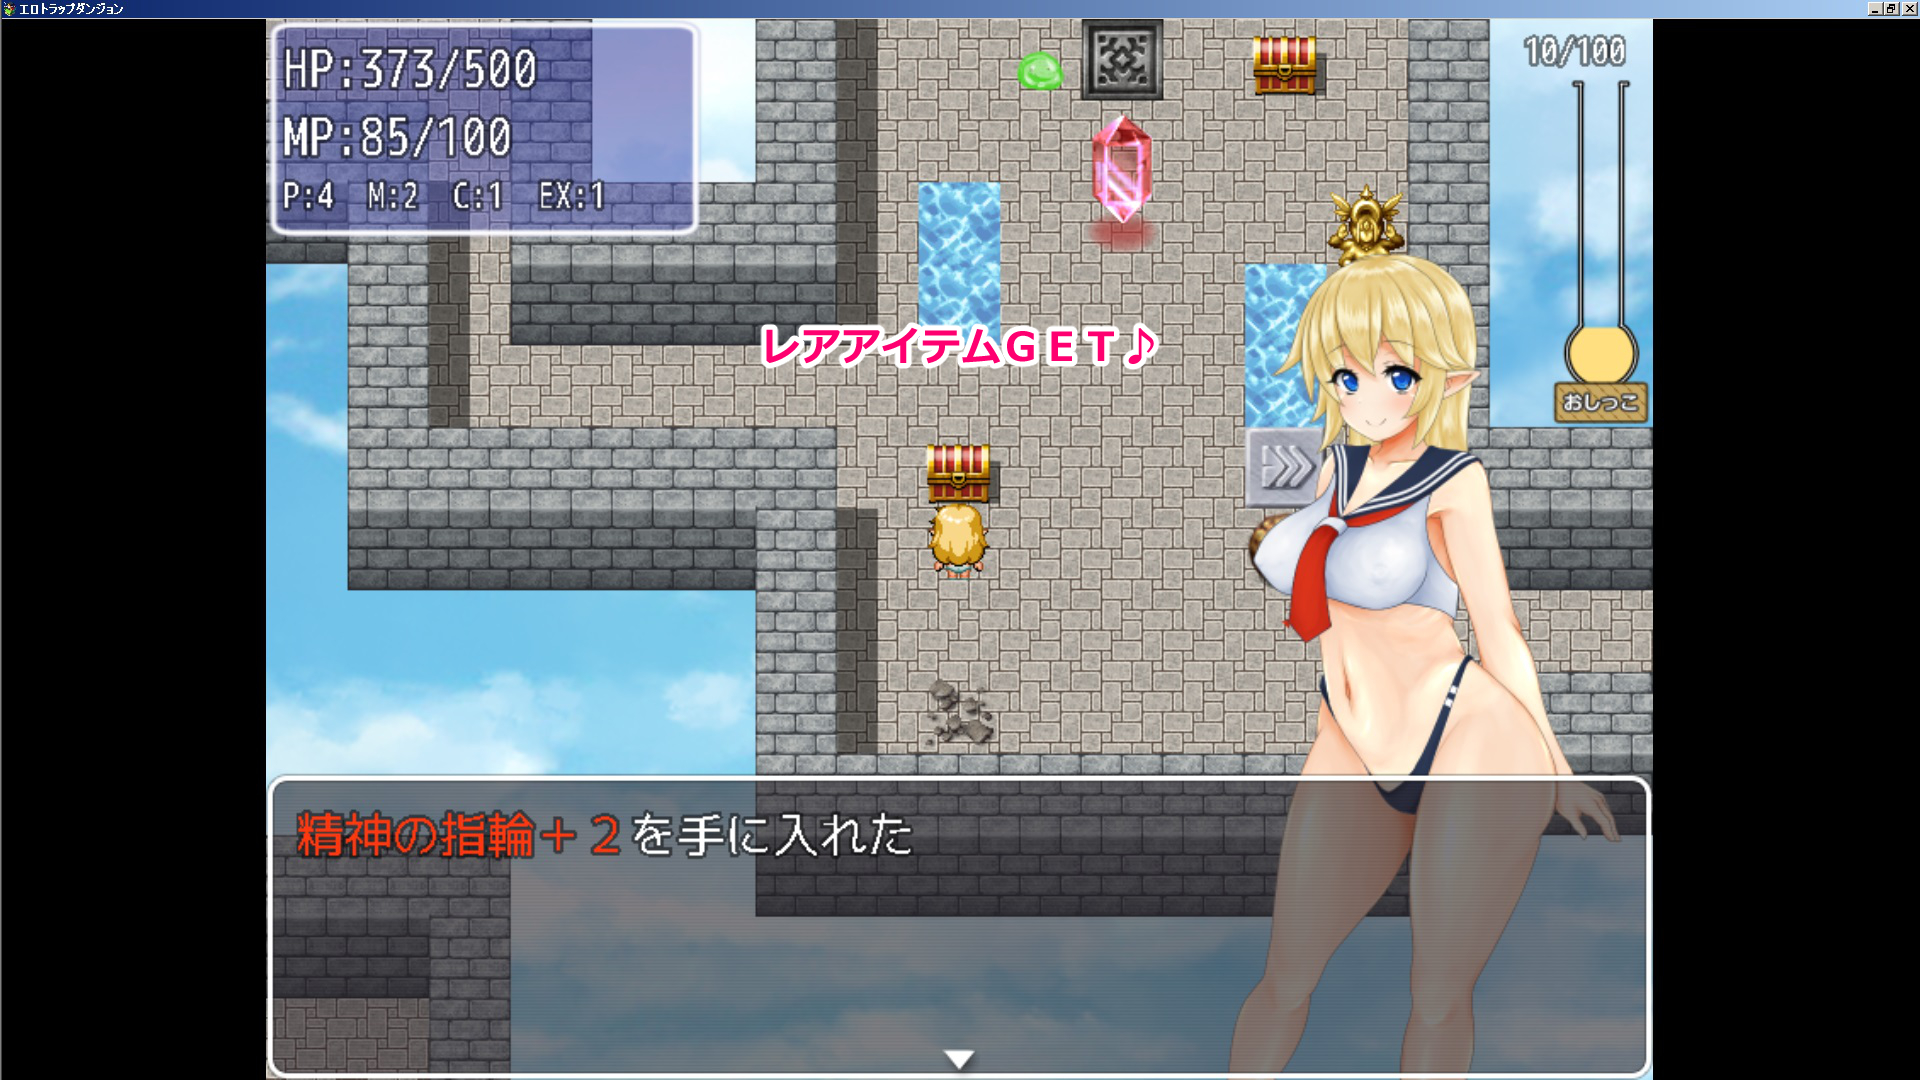 Rpg Maker Vx Ace Hentai Games - Erotic Trap Dungeon 1.4 Â» Download Hentai Games